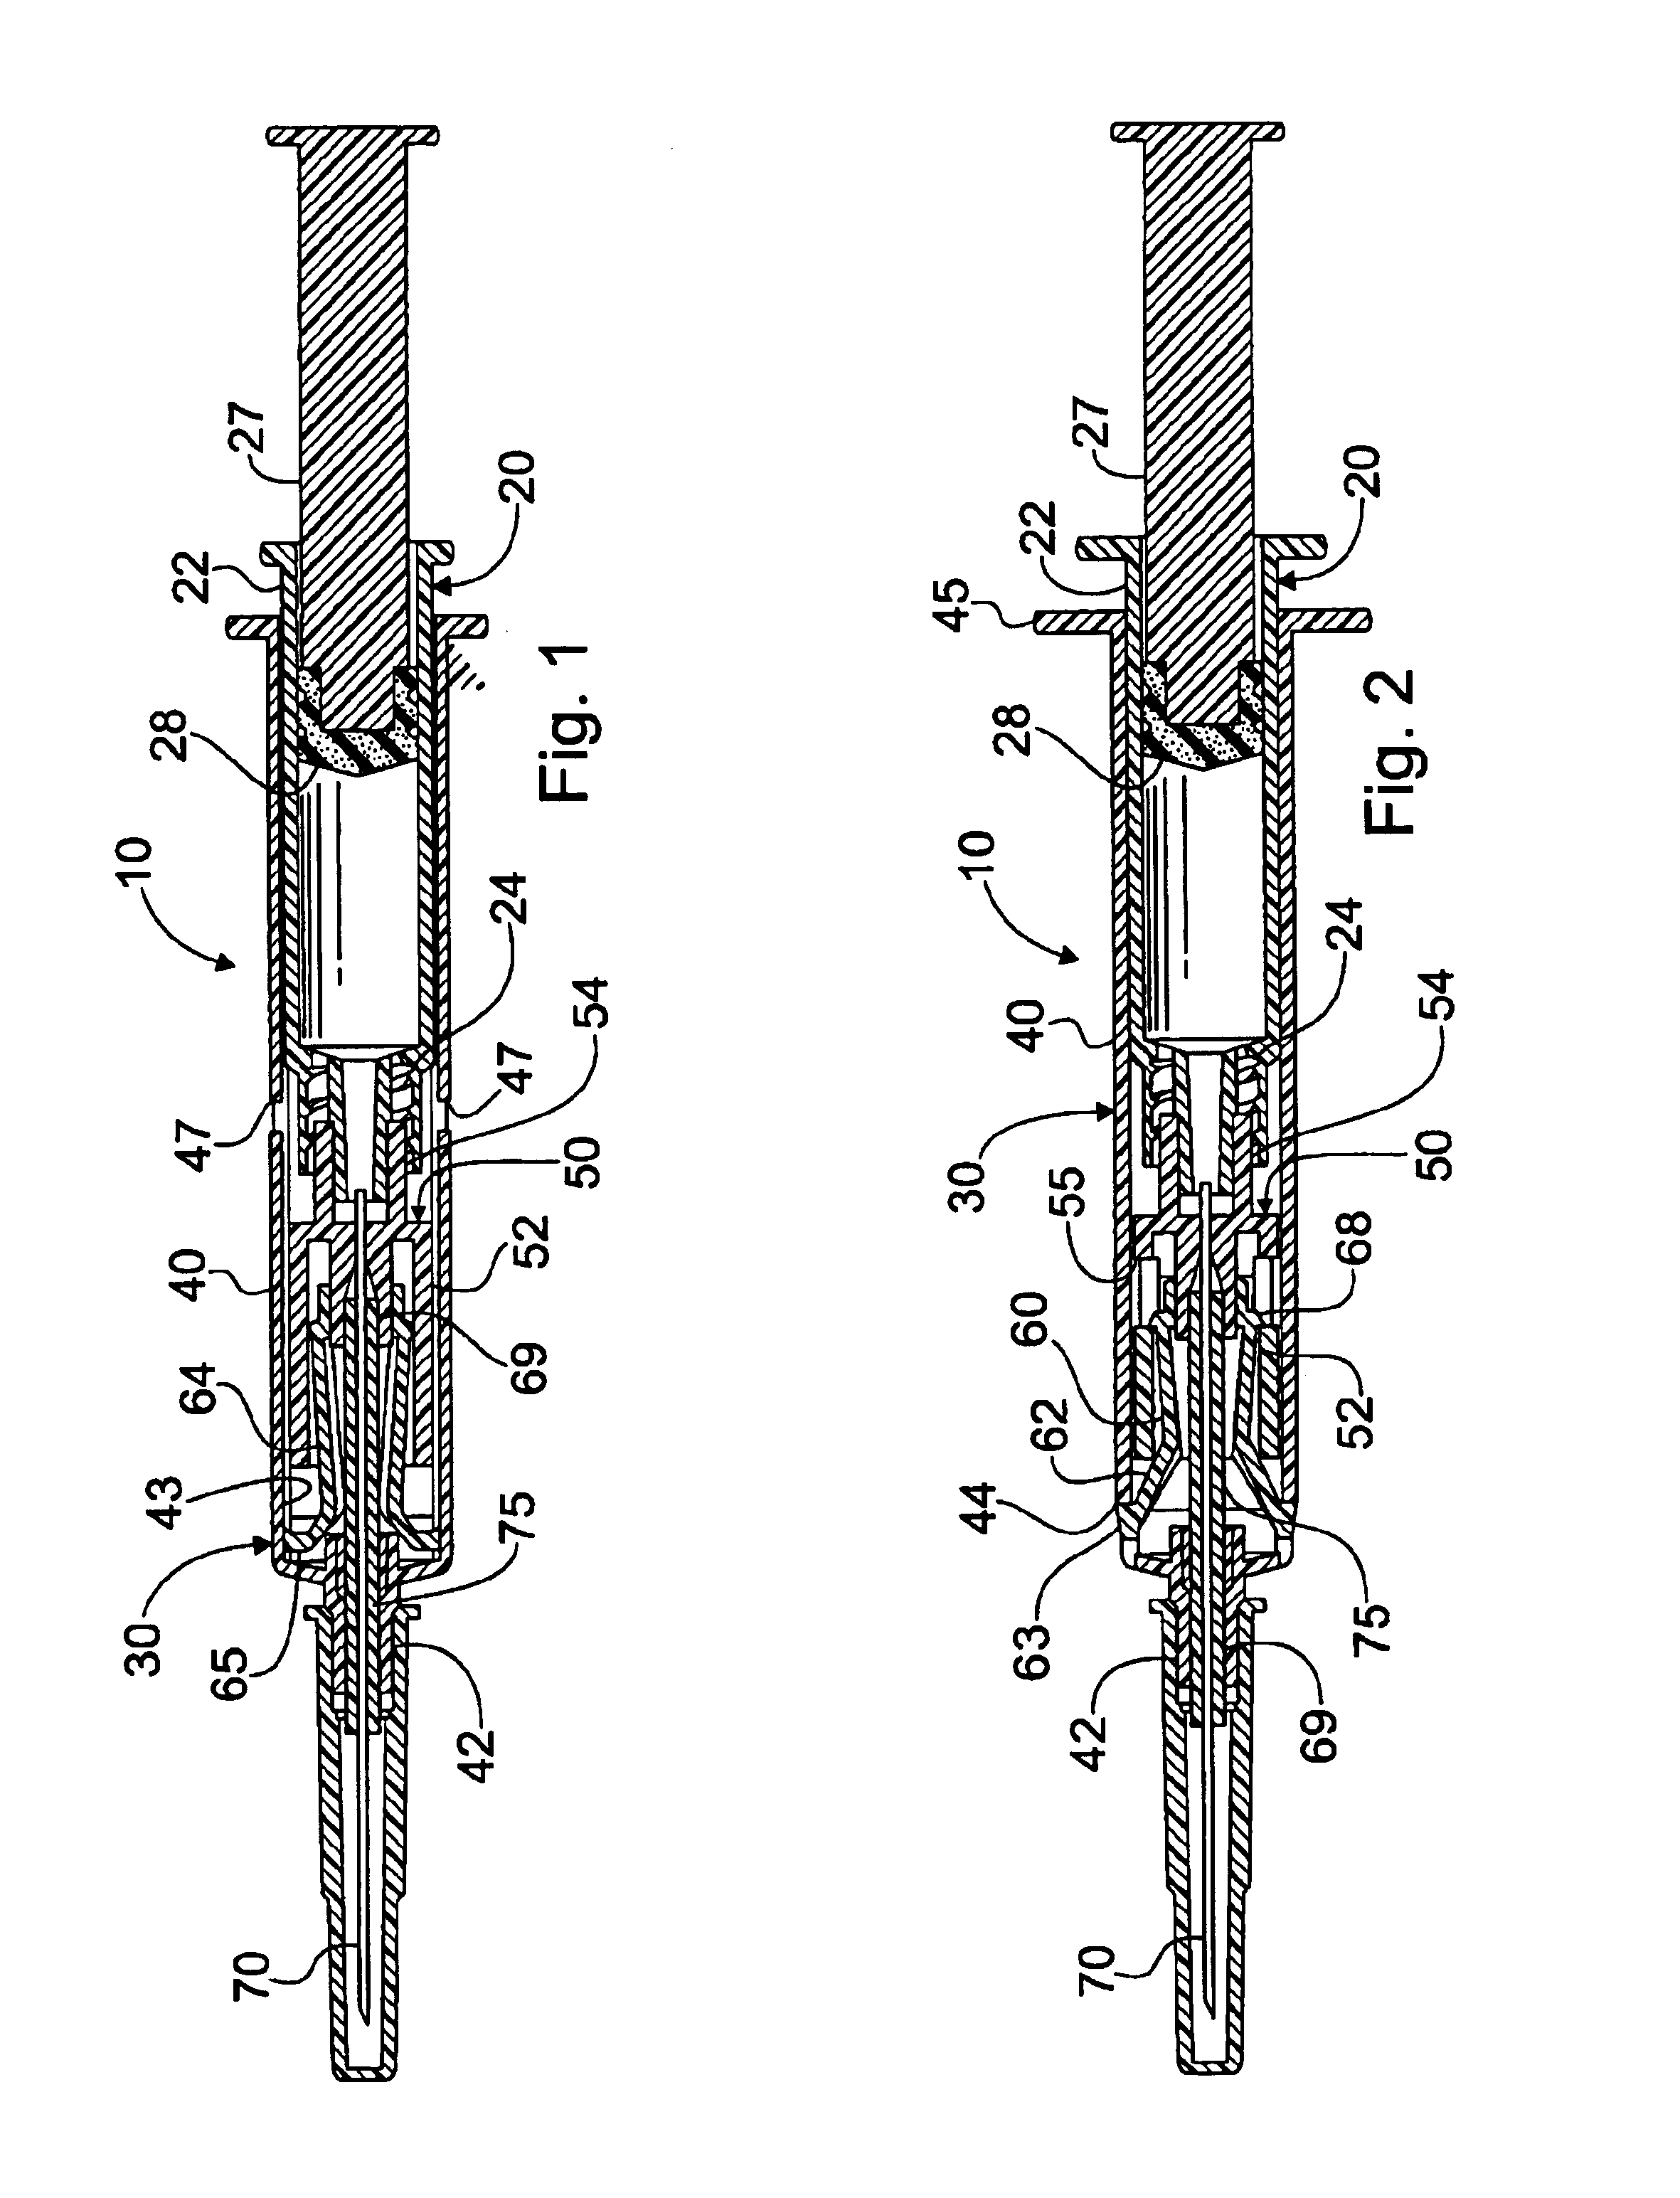 Combination safety needle assembly and medical apparatus